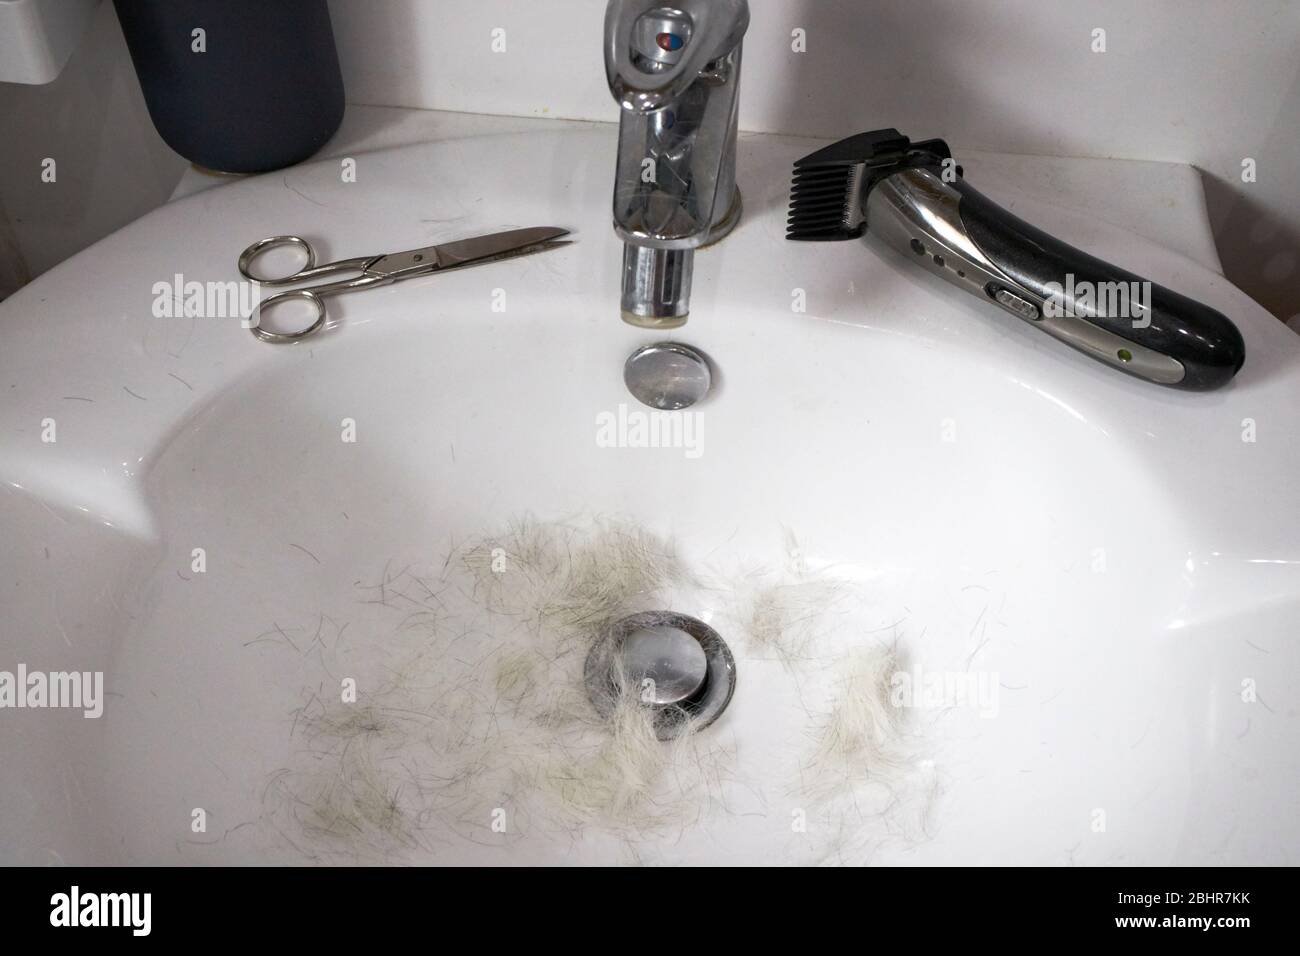 grey hairs scissors and cheap hair trimmer in a sink due to middle aged man cutting his own hair due to self isolation covid-19 pandemic Stock Photo